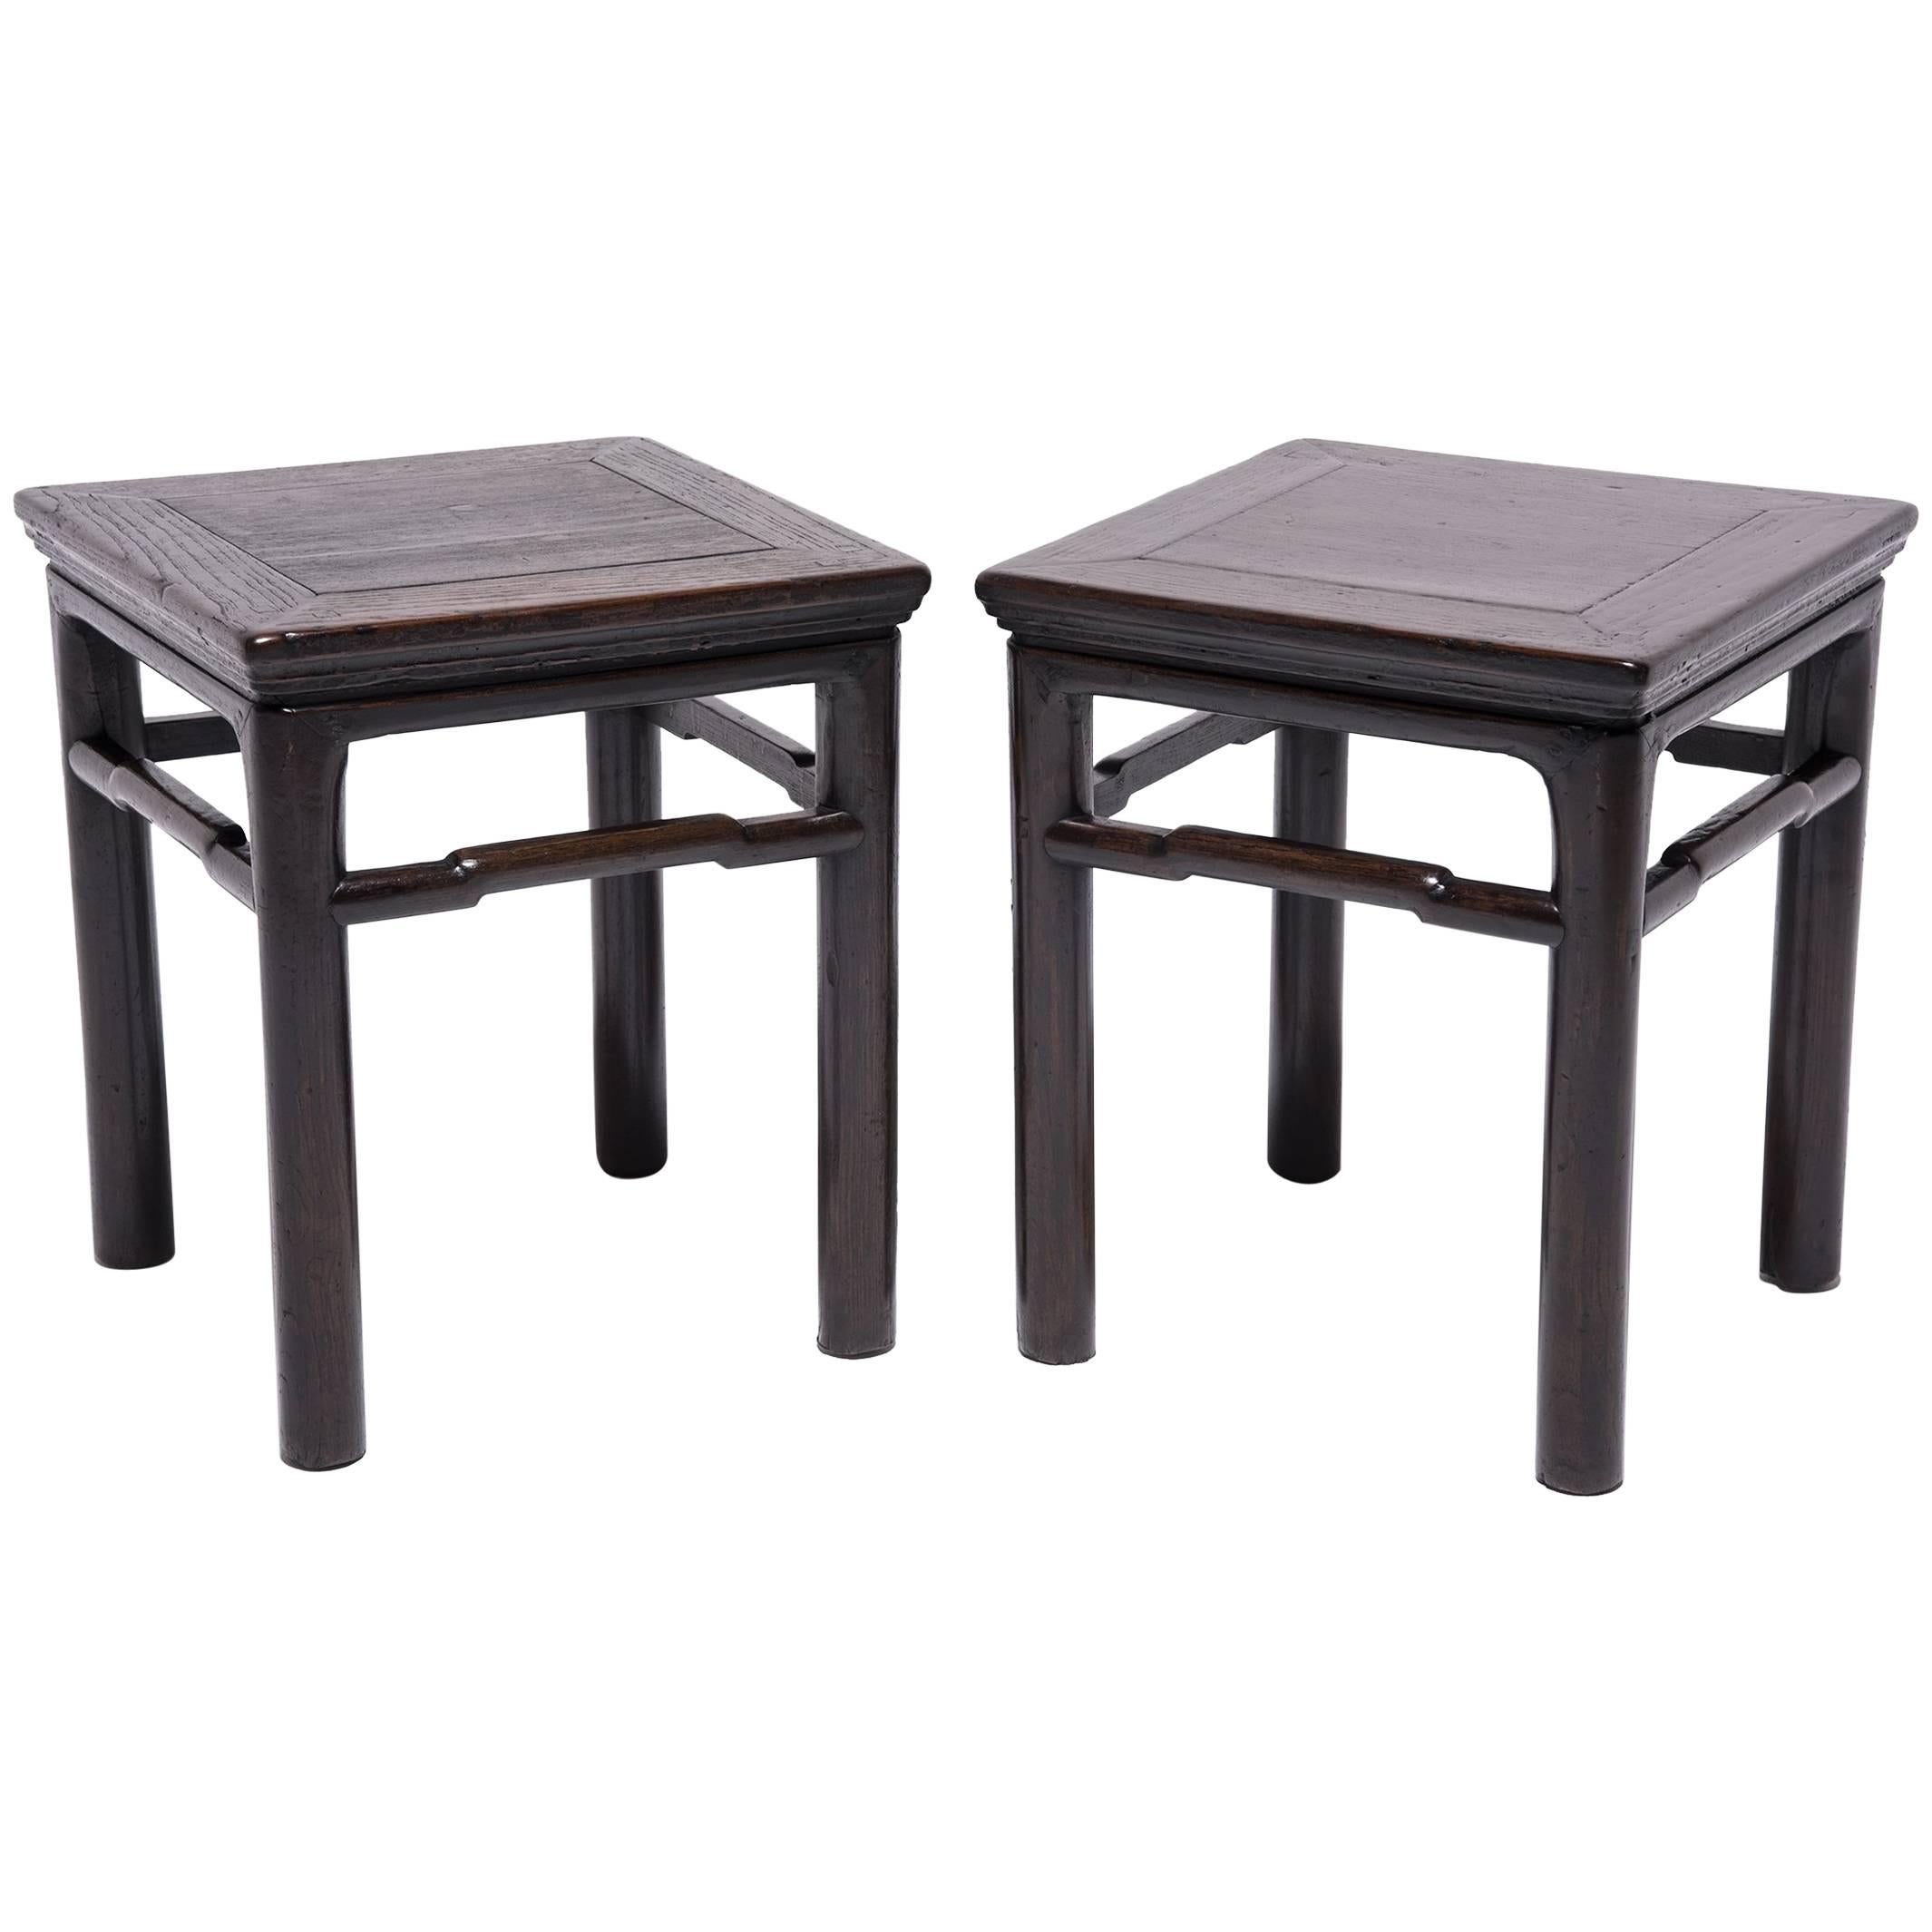 Pair of Mid-19th Century Chinese Square Stools with Humpback Stretchers